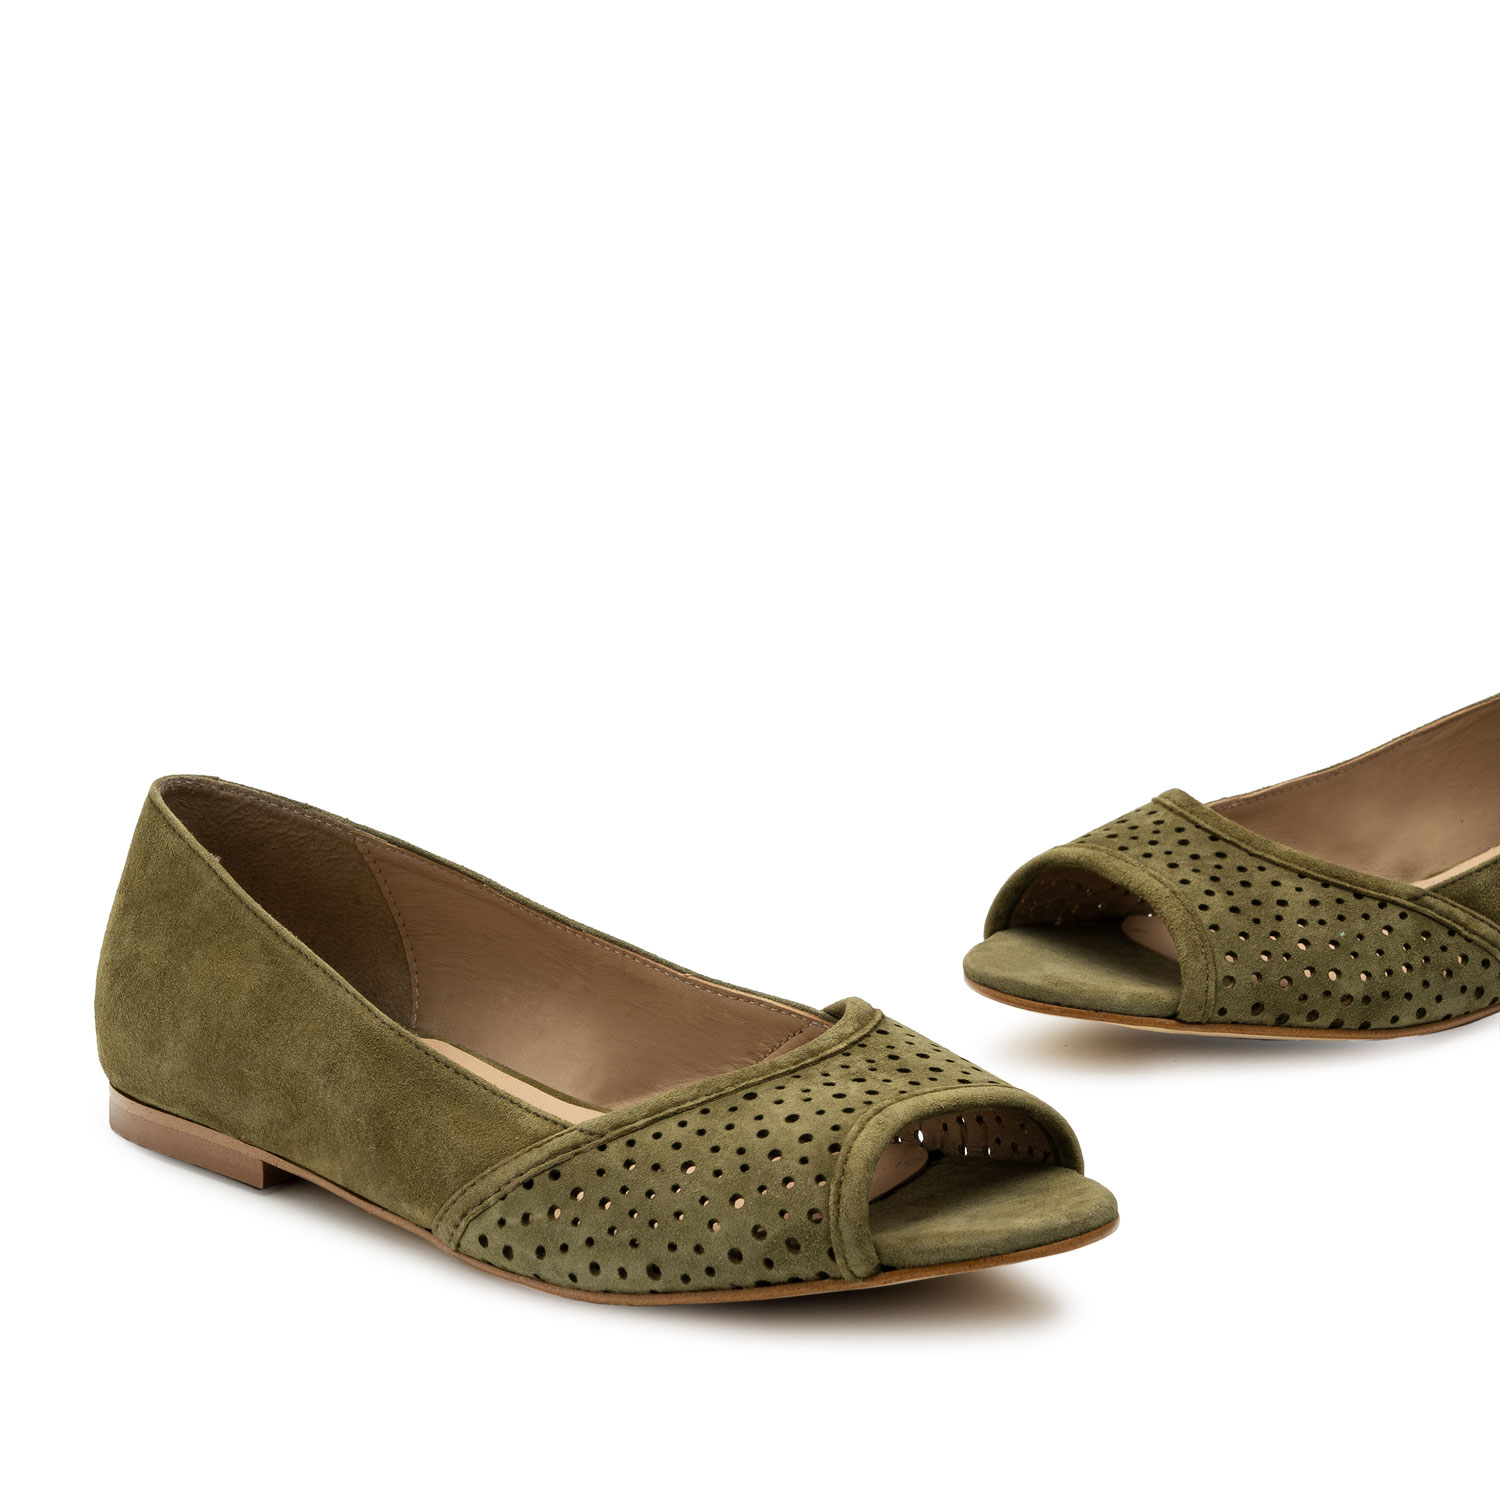 Open Toe Ballet Flats in Green Suede Leather 